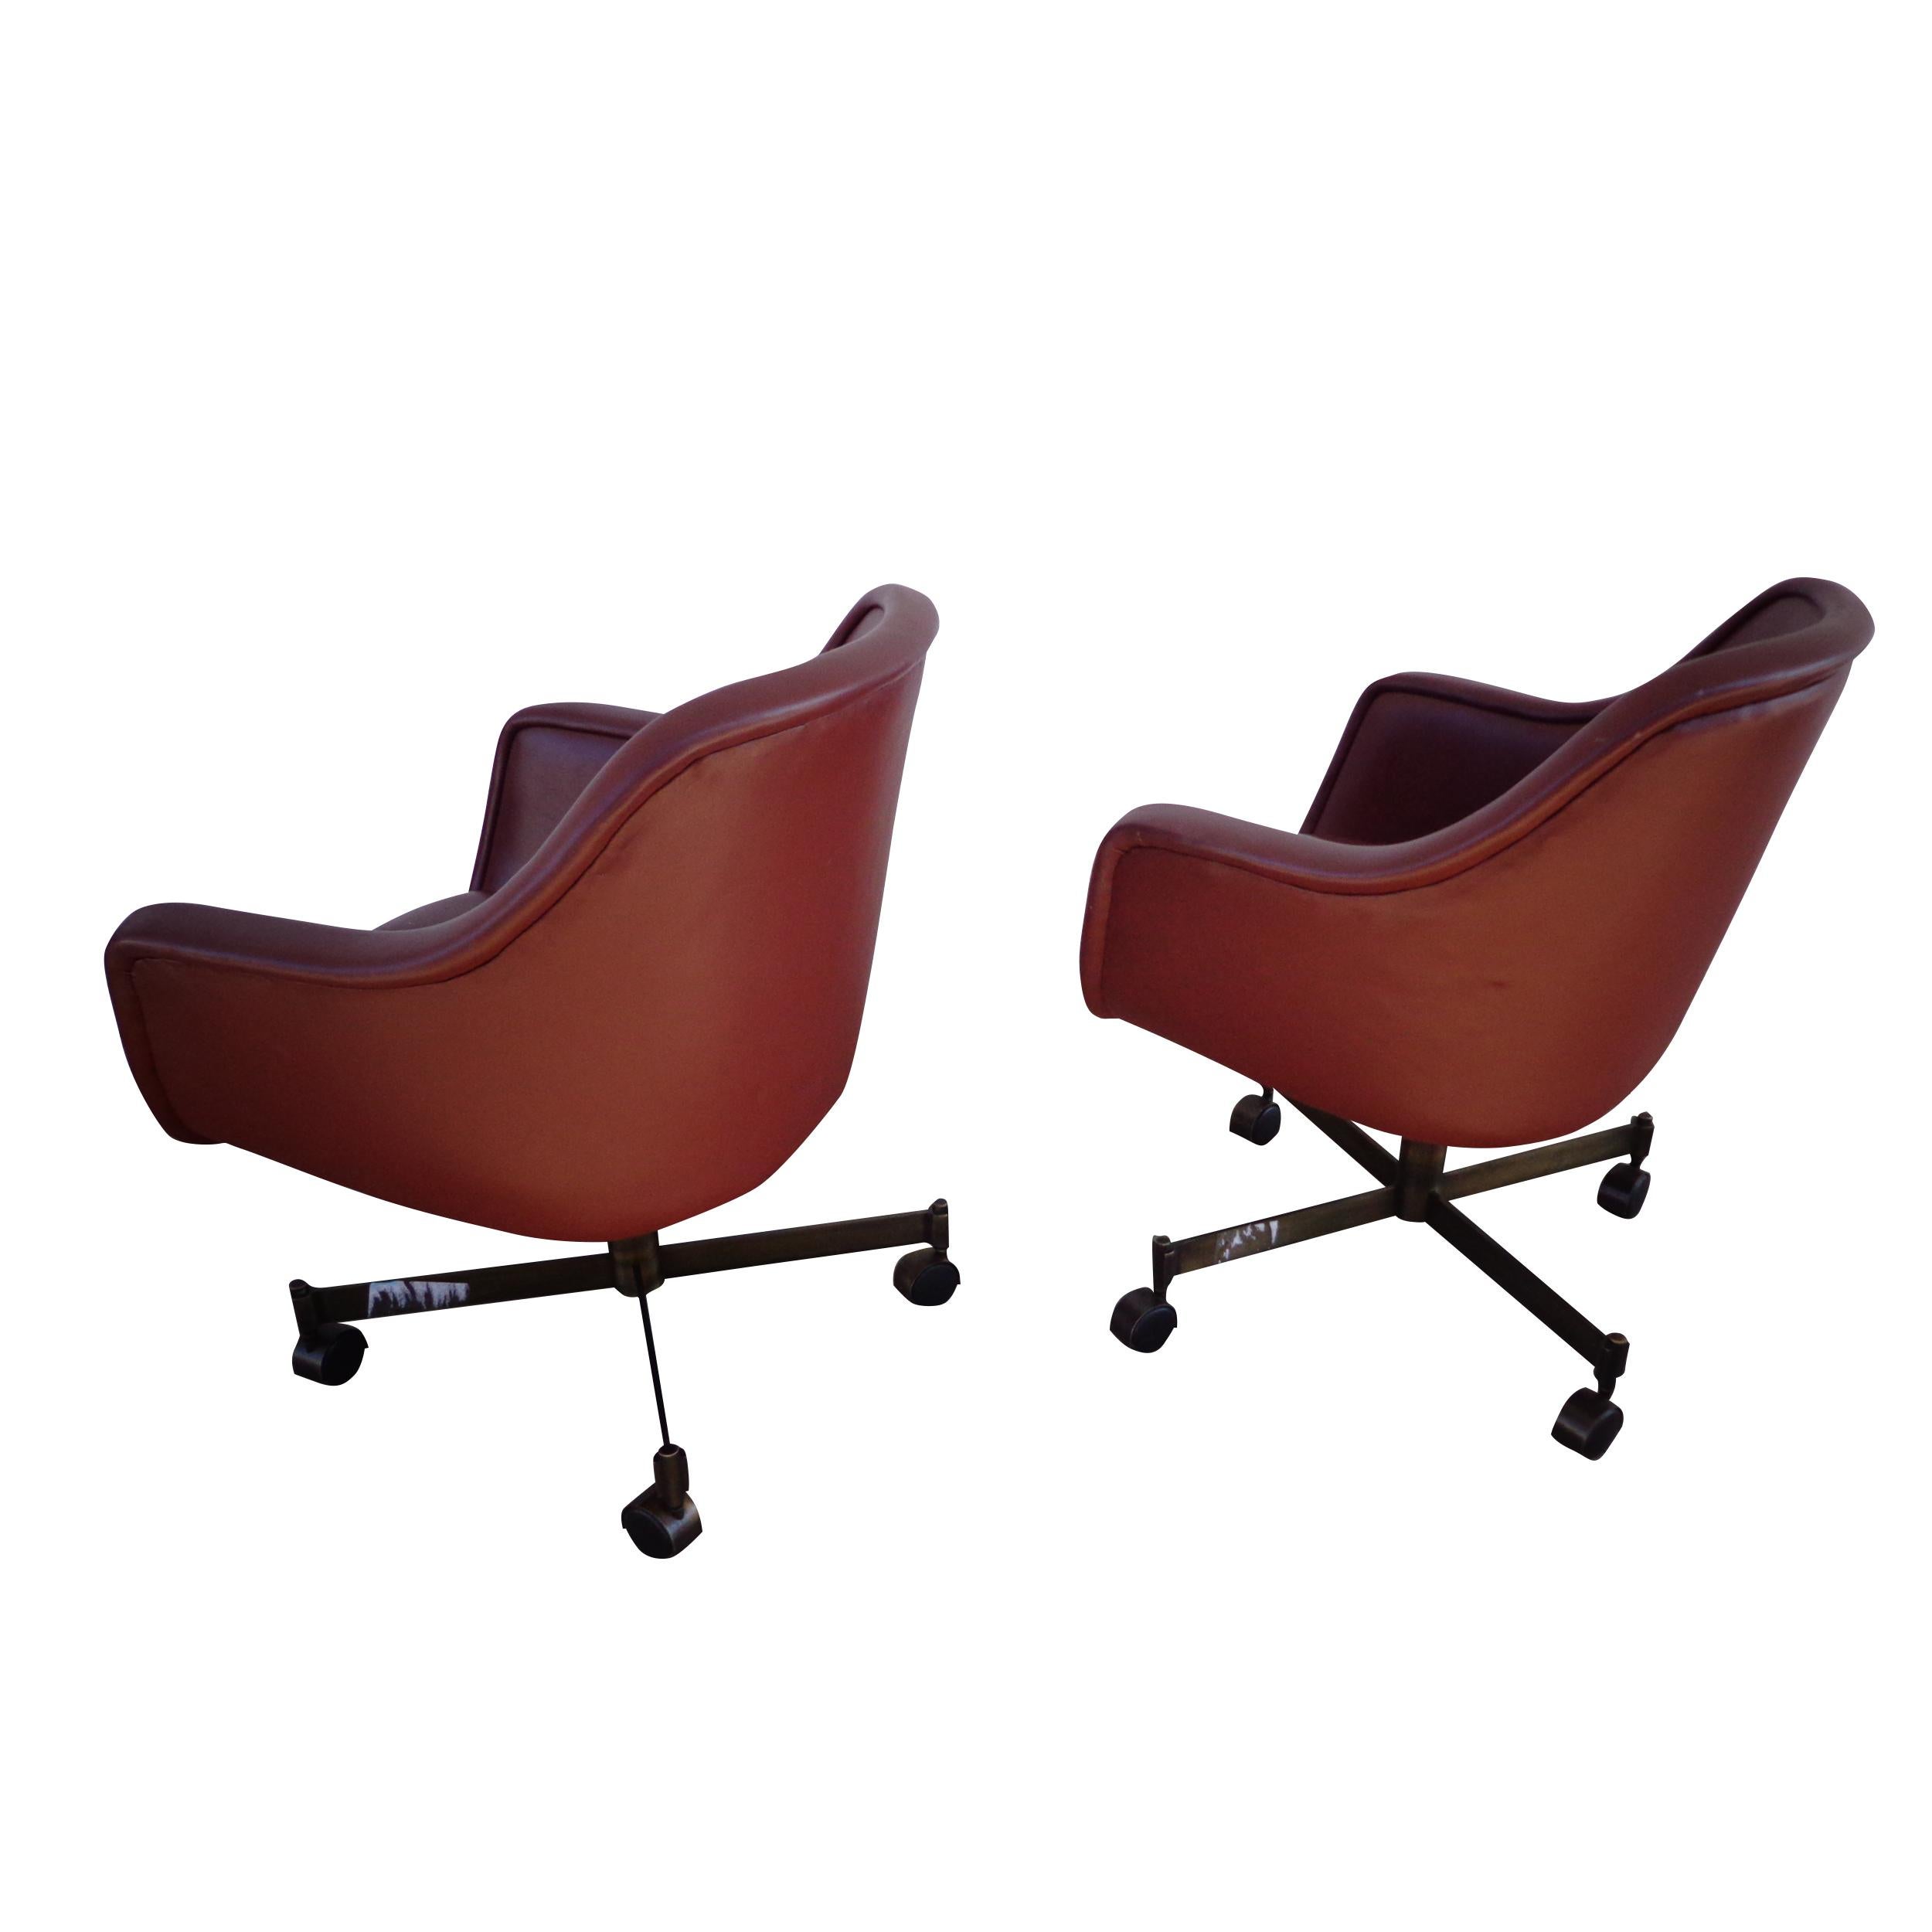 Mid-Century Modern 1 Ward Bennett for Brickel and Associates Desk Conference Chair For Sale